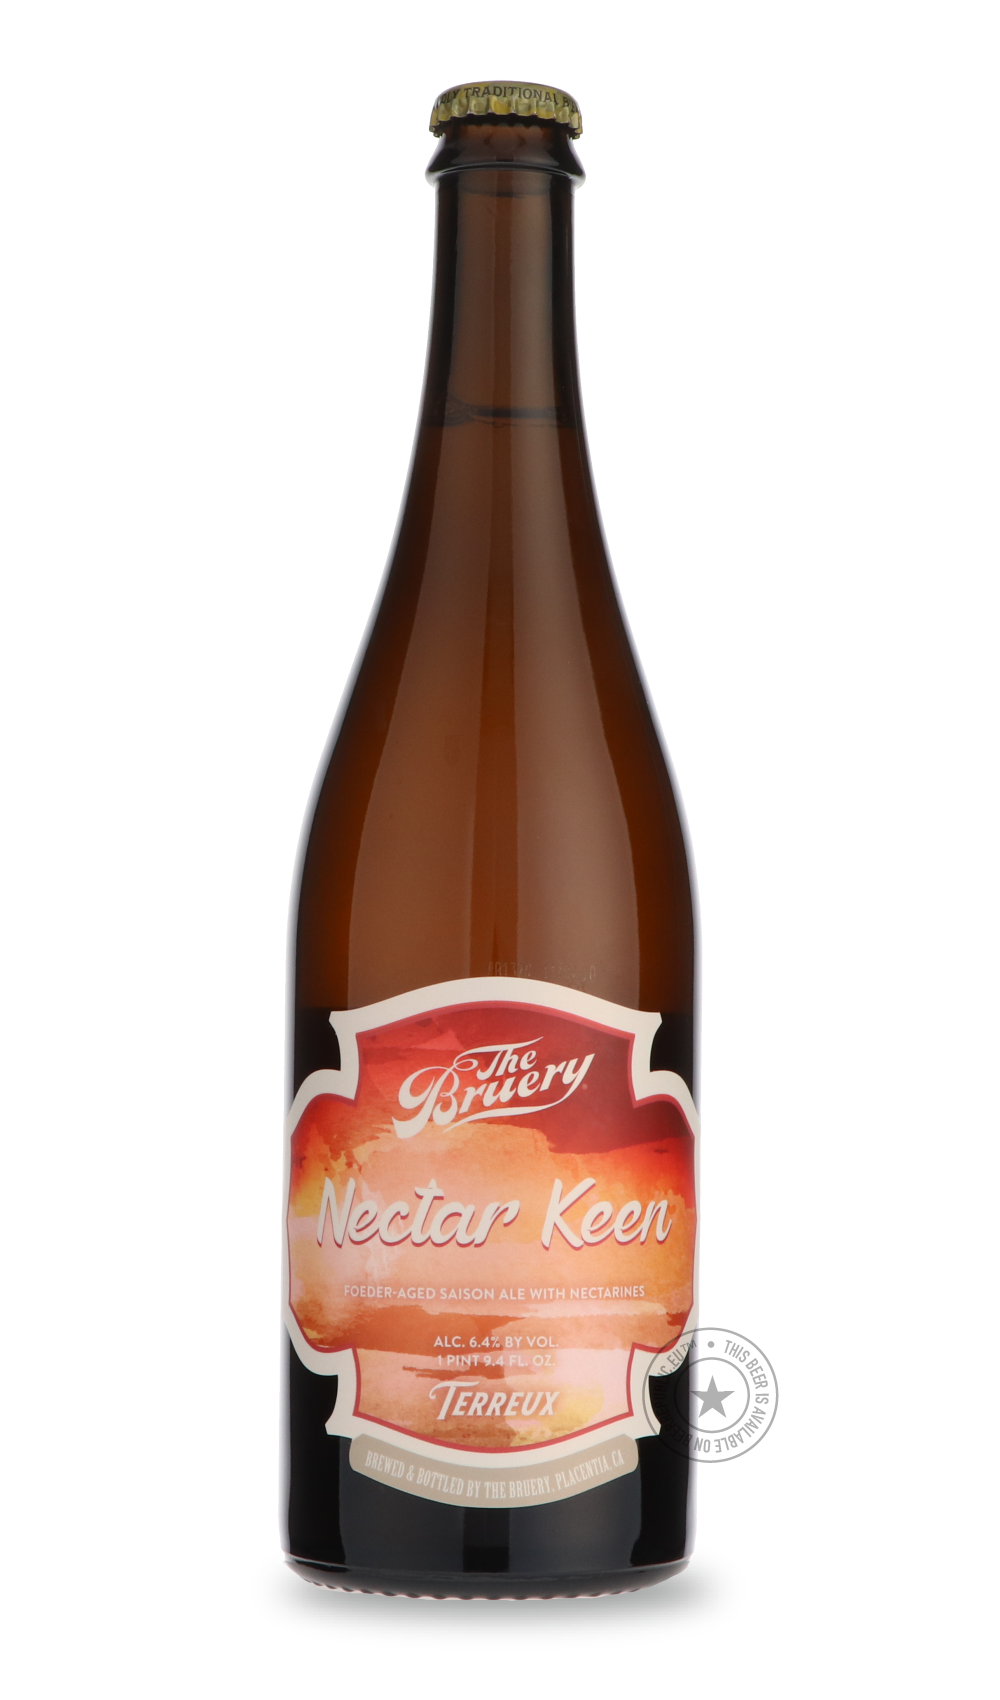 -The Bruery- Nectar Keen-Sour / Wild & Fruity- Only @ Beer Republic - The best online beer store for American & Canadian craft beer - Buy beer online from the USA and Canada - Bier online kopen - Amerikaans bier kopen - Craft beer store - Craft beer kopen - Amerikanisch bier kaufen - Bier online kaufen - Acheter biere online - IPA - Stout - Porter - New England IPA - Hazy IPA - Imperial Stout - Barrel Aged - Barrel Aged Imperial Stout - Brown - Dark beer - Blond - Blonde - Pilsner - Lager - Wheat - Weizen -